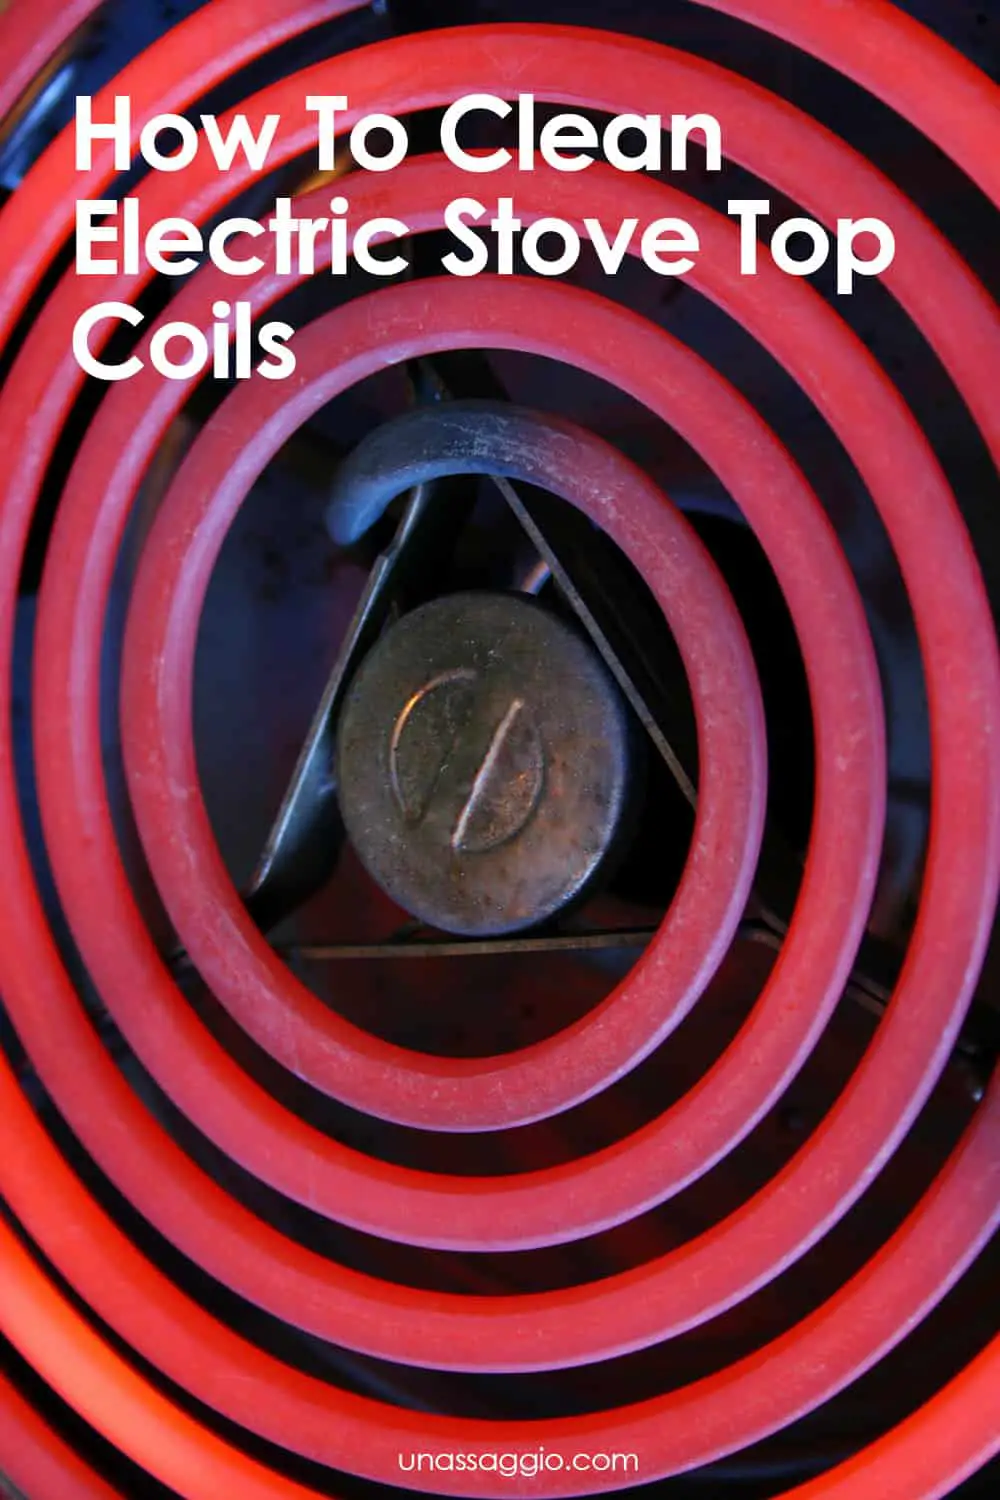 How To Clean Electric Stove Top Coils